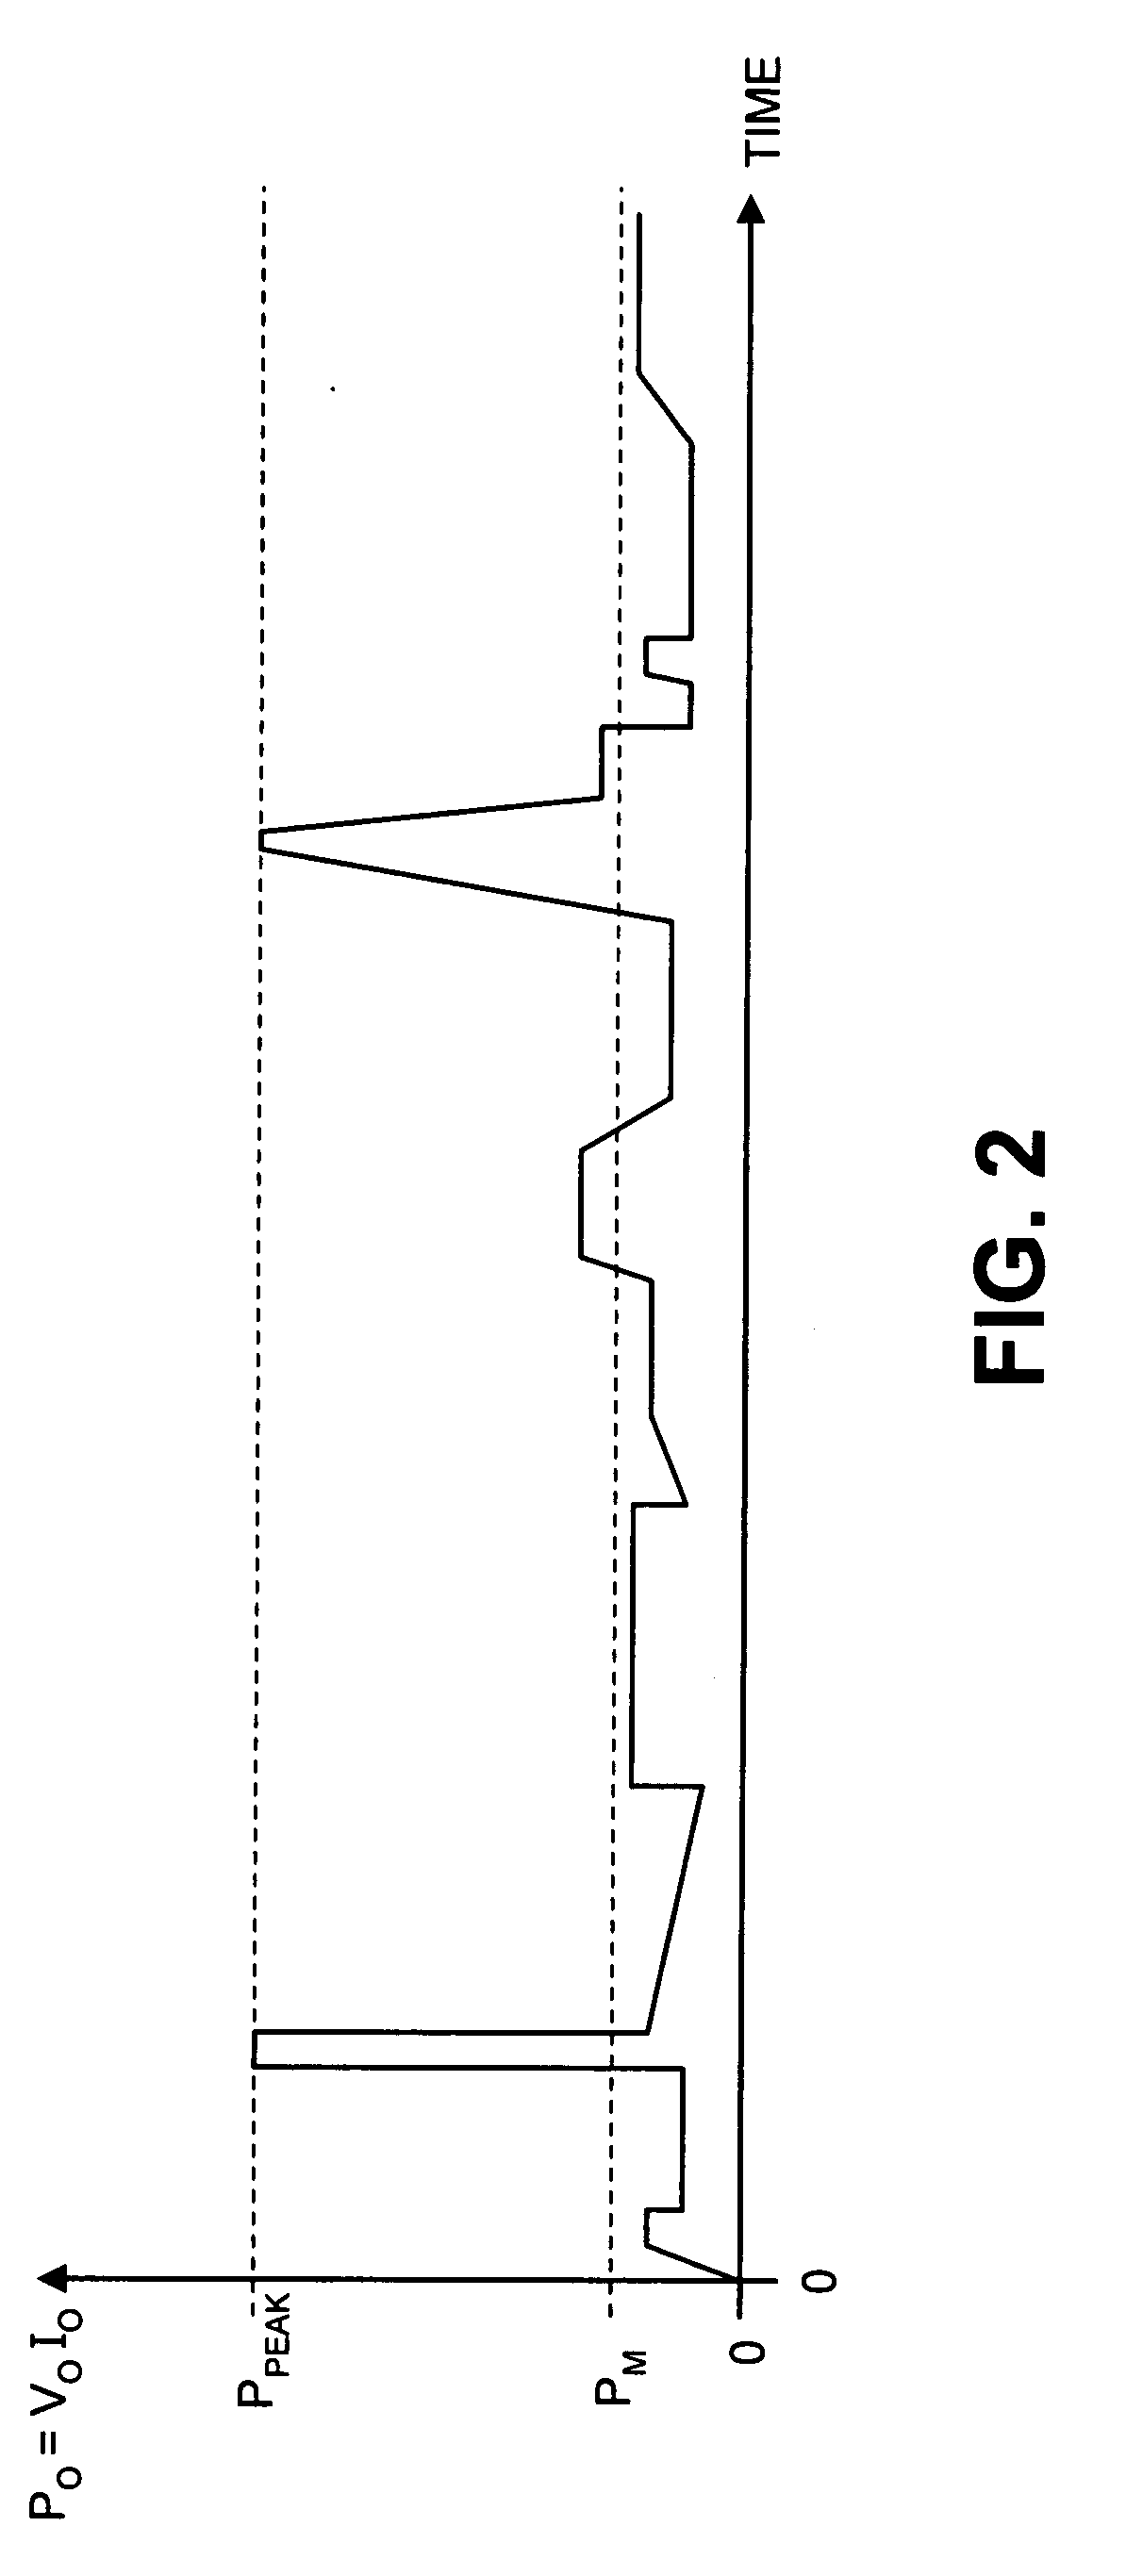 Method and apparatus to provide temporary peak power from a switching regulator